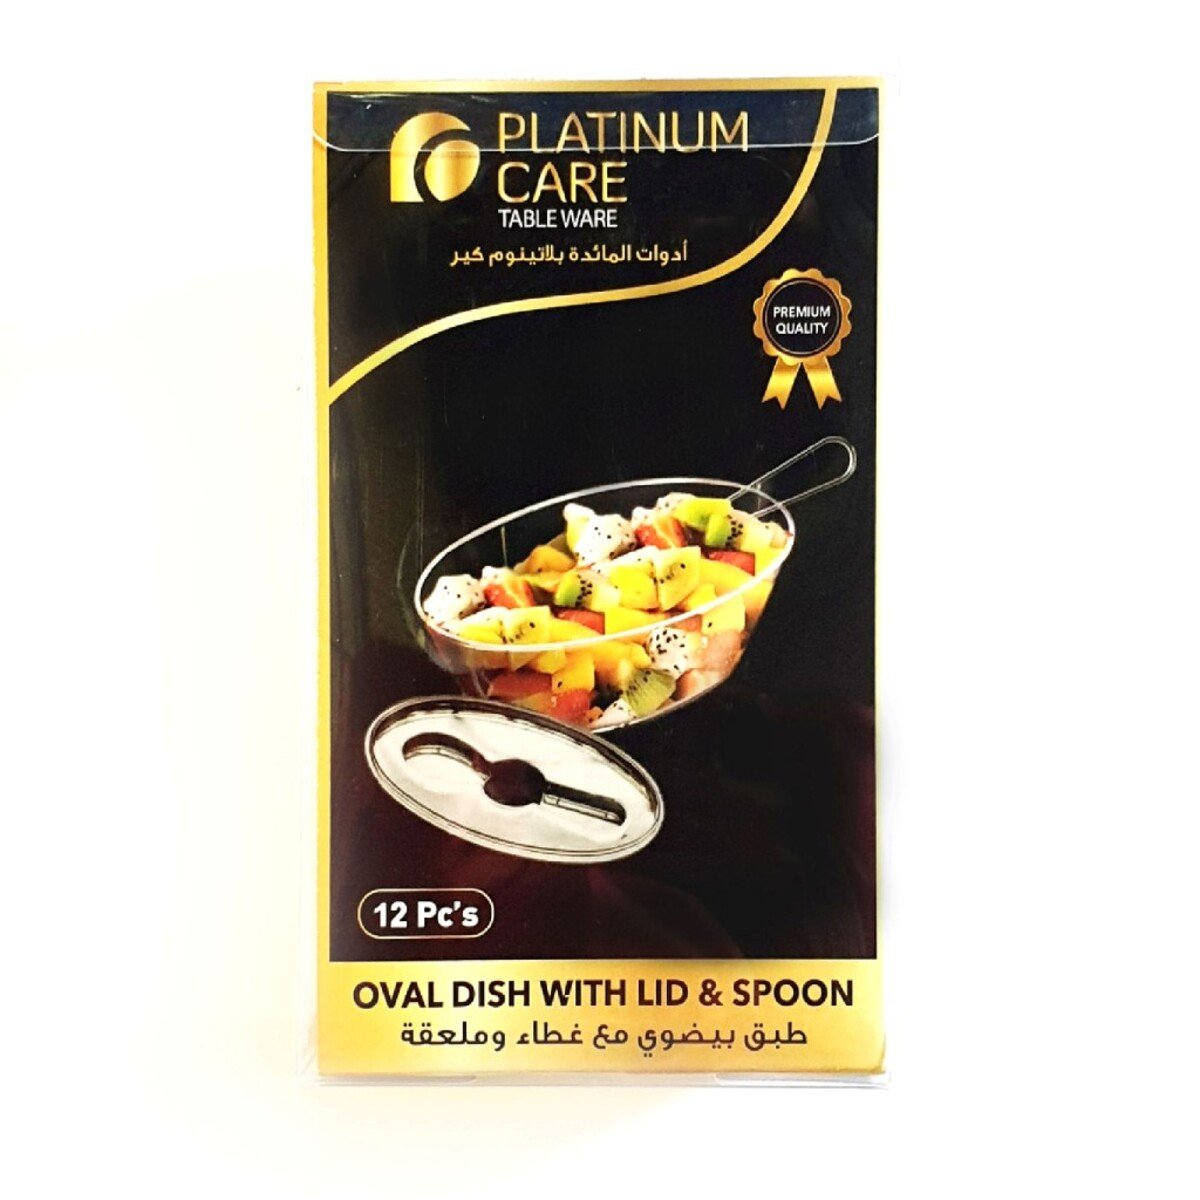 Platinum Care Oval Dish With Lid & Spoon 12 pcs